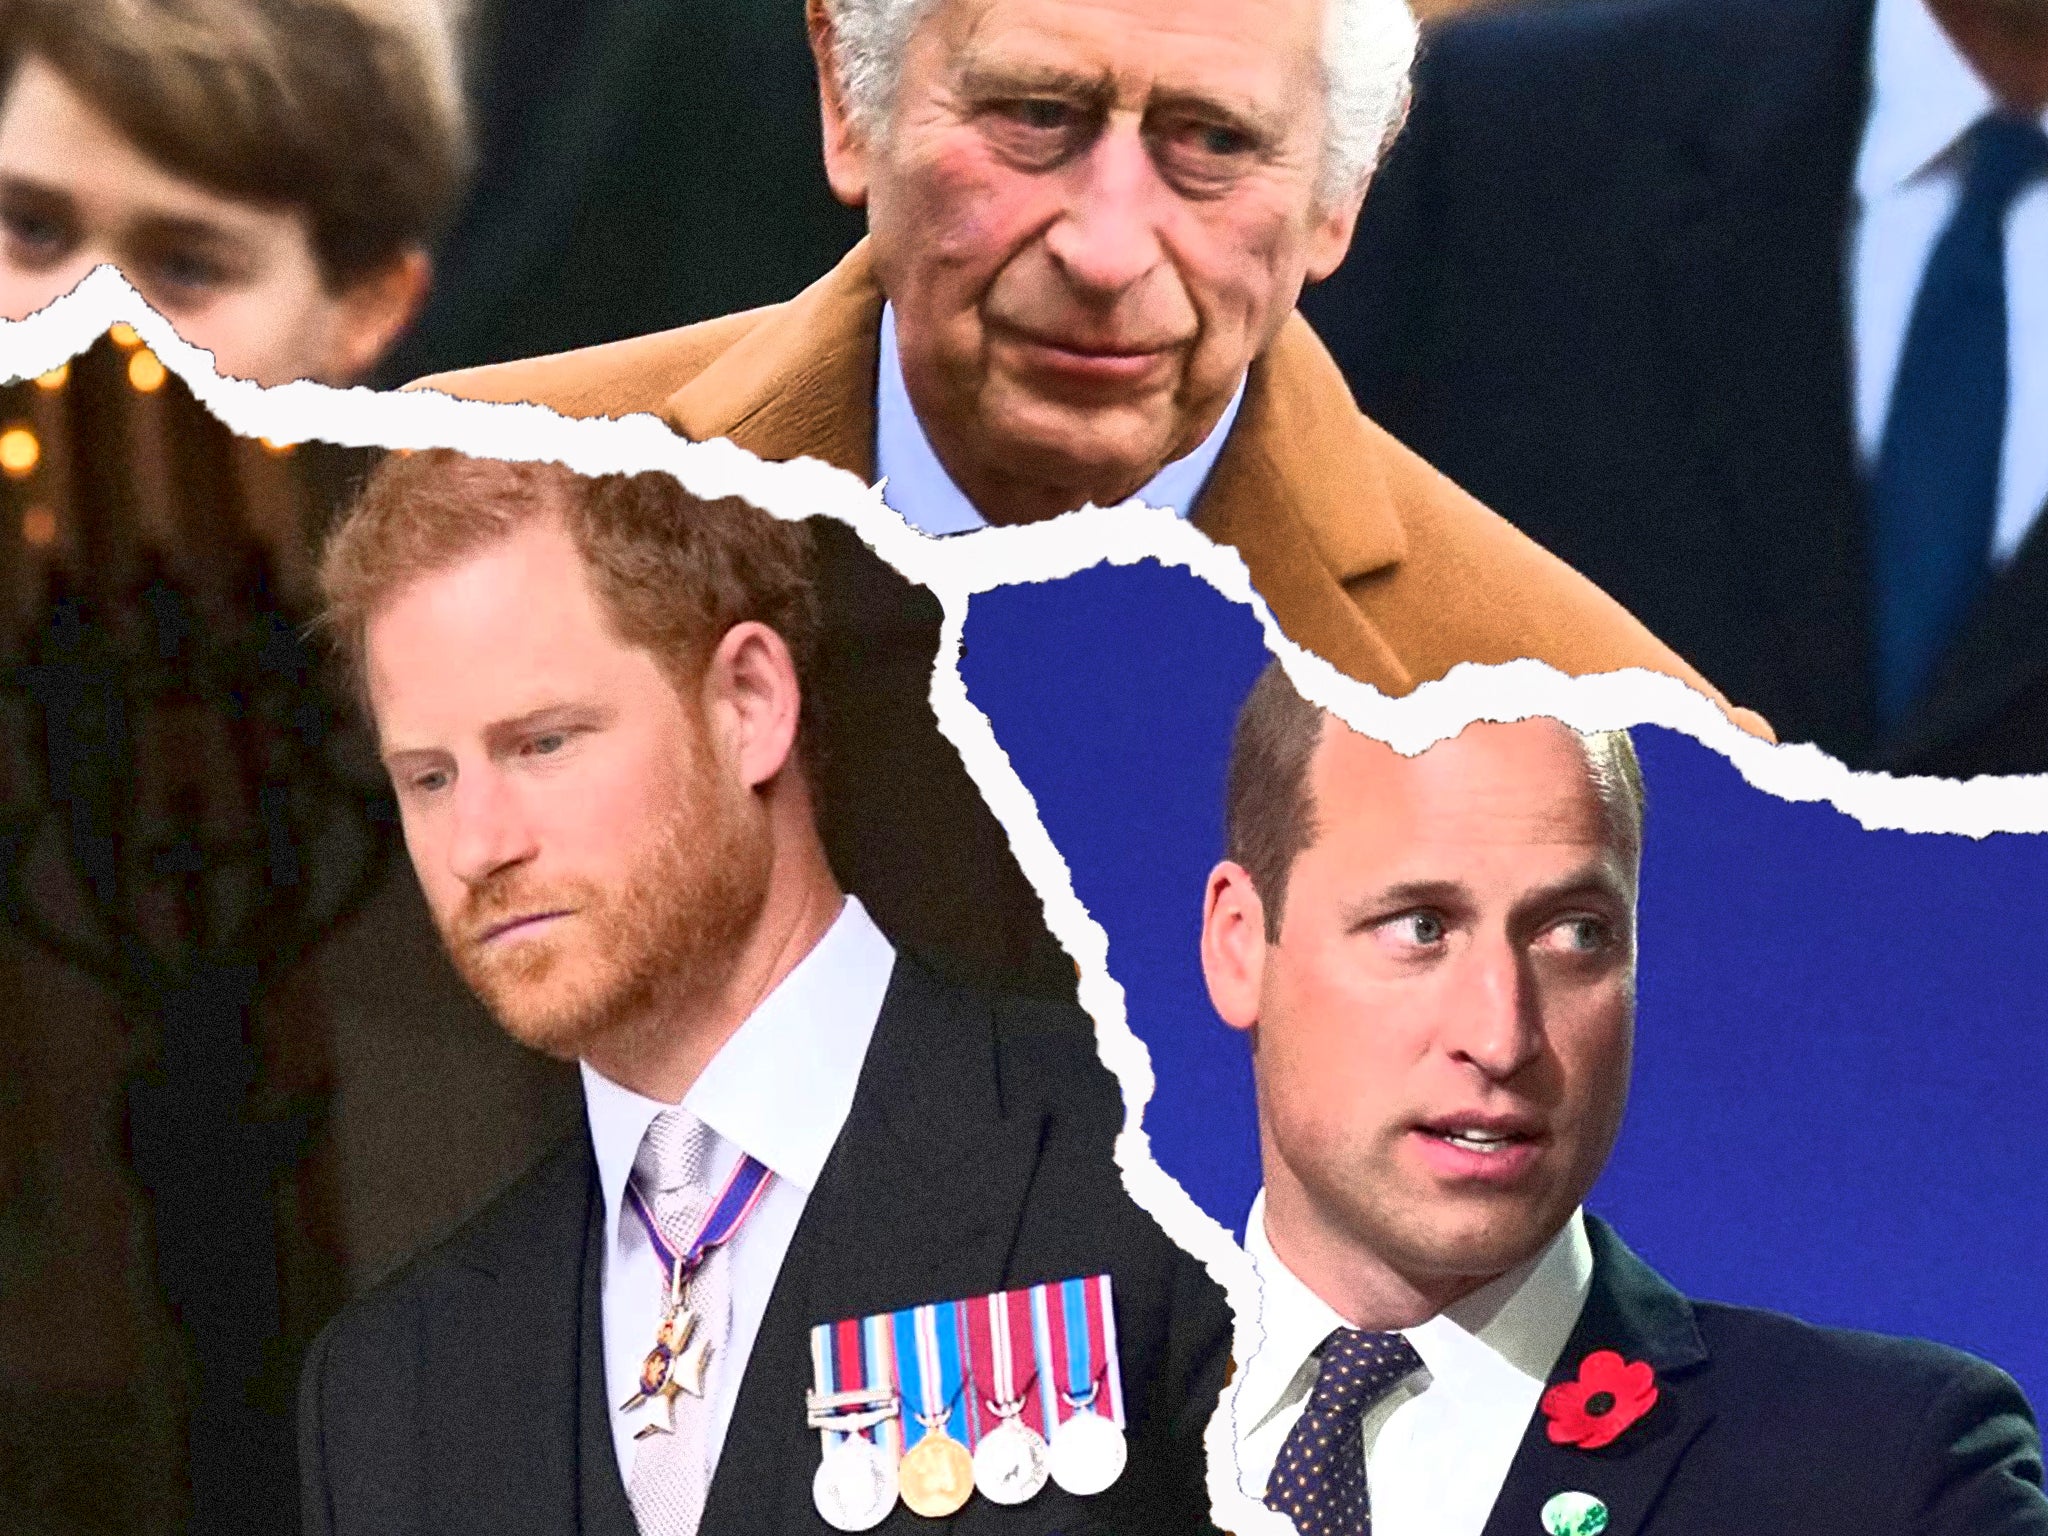 A feud between Harry and William, written about extensively in Harry’s new memoir ‘Spare’, has long impacted their father